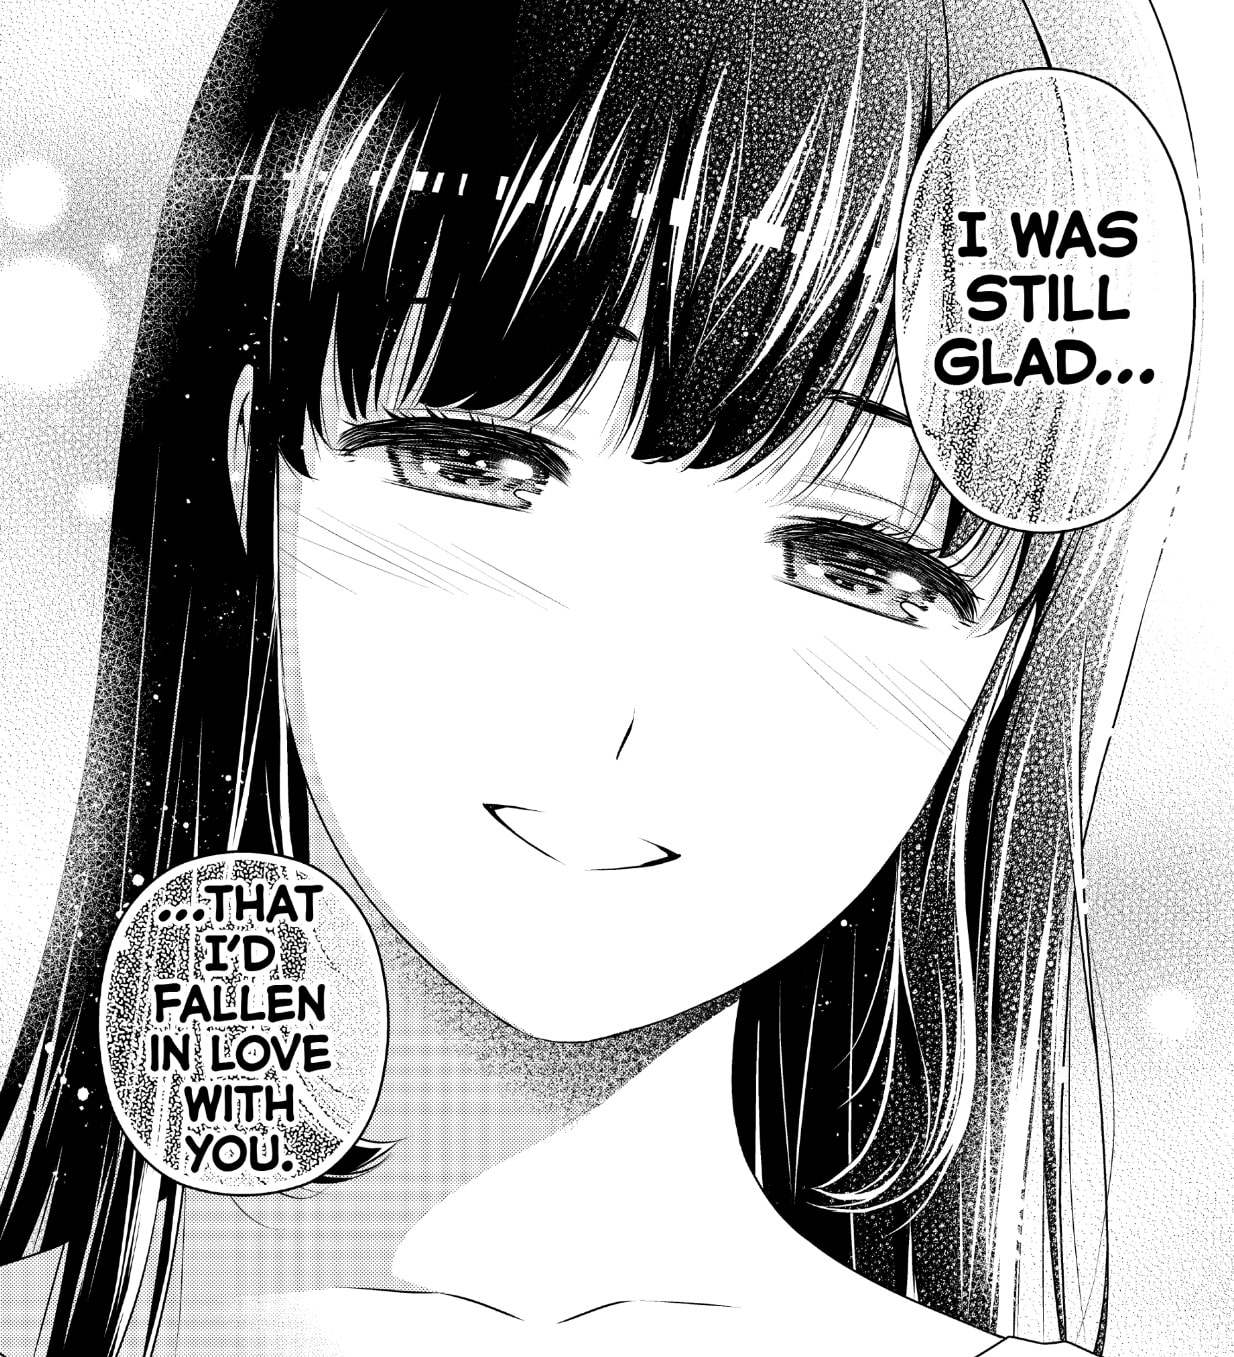 'Domestic Girlfriend' chapter 276 (final chapter) review